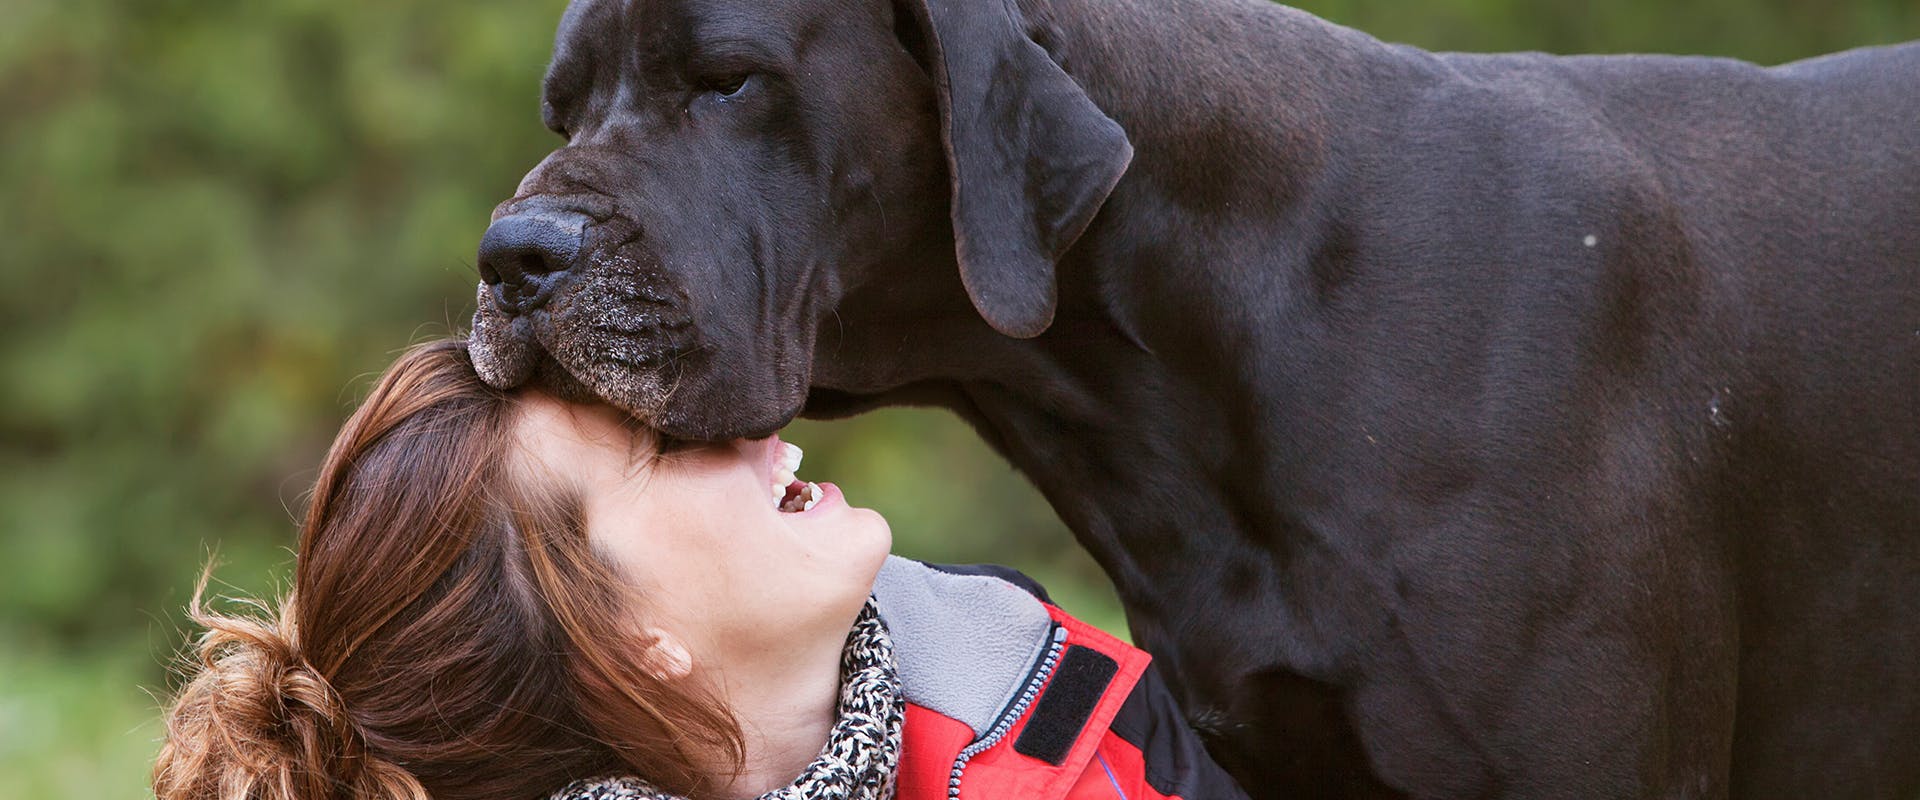 A Great Dane resting his head on a woman, who is laughing and joyful